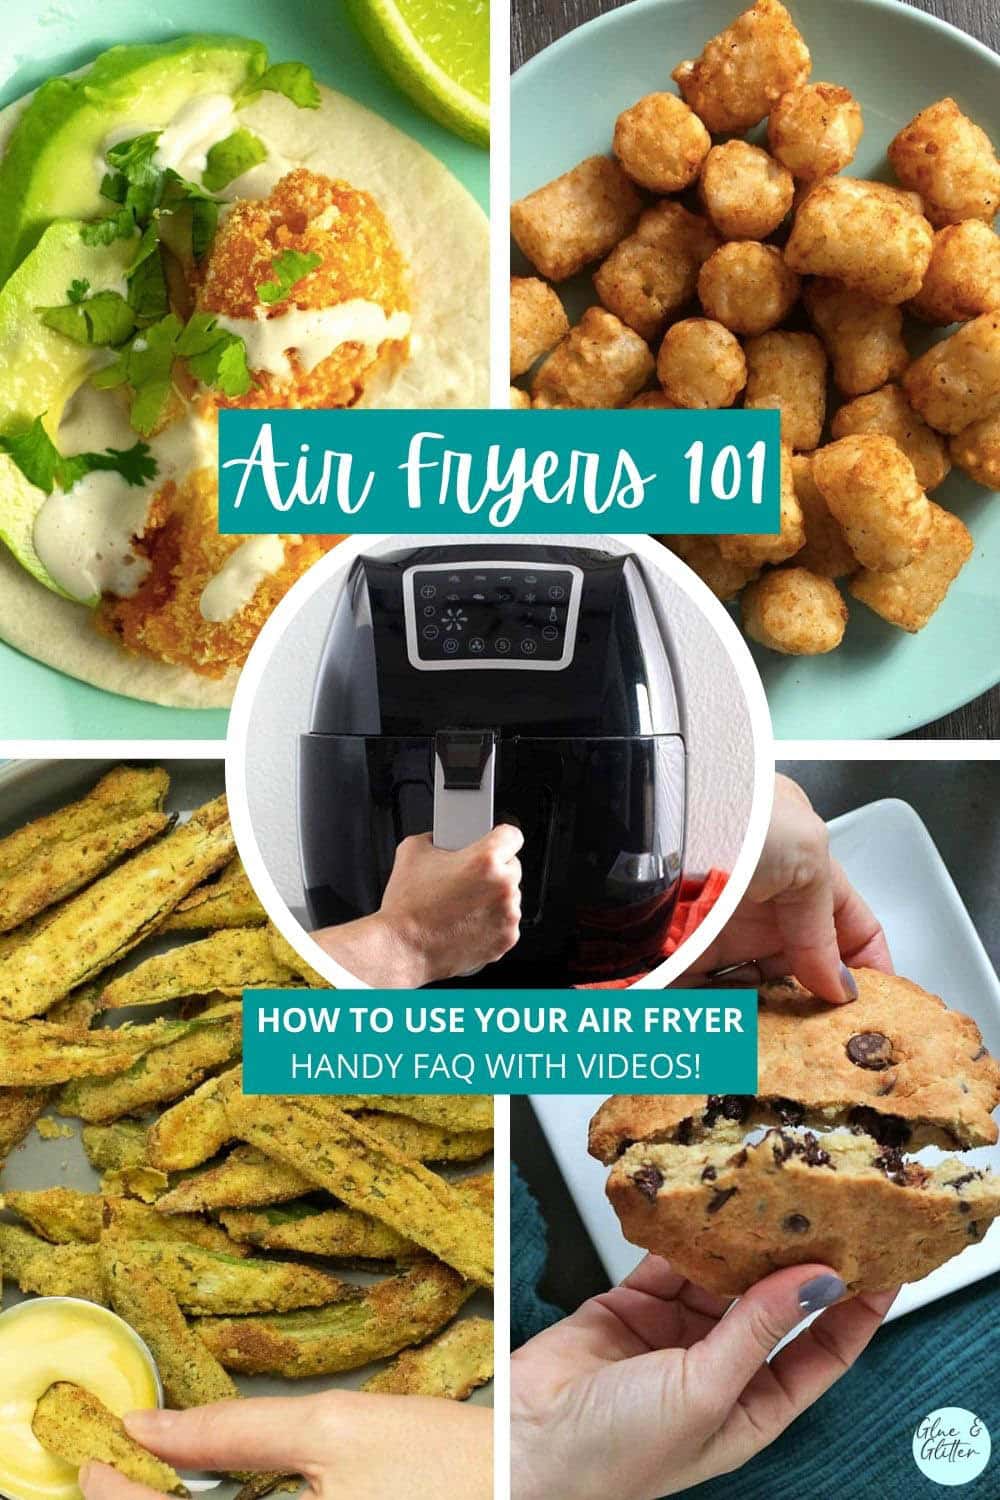 image collage of cauliflower tacos, tater tots, crispy okra, a cookie, and an air fryer. Text says, "Air Fryers 101. How to Use Your Air Fryer. Helpful FAQ with videos!"